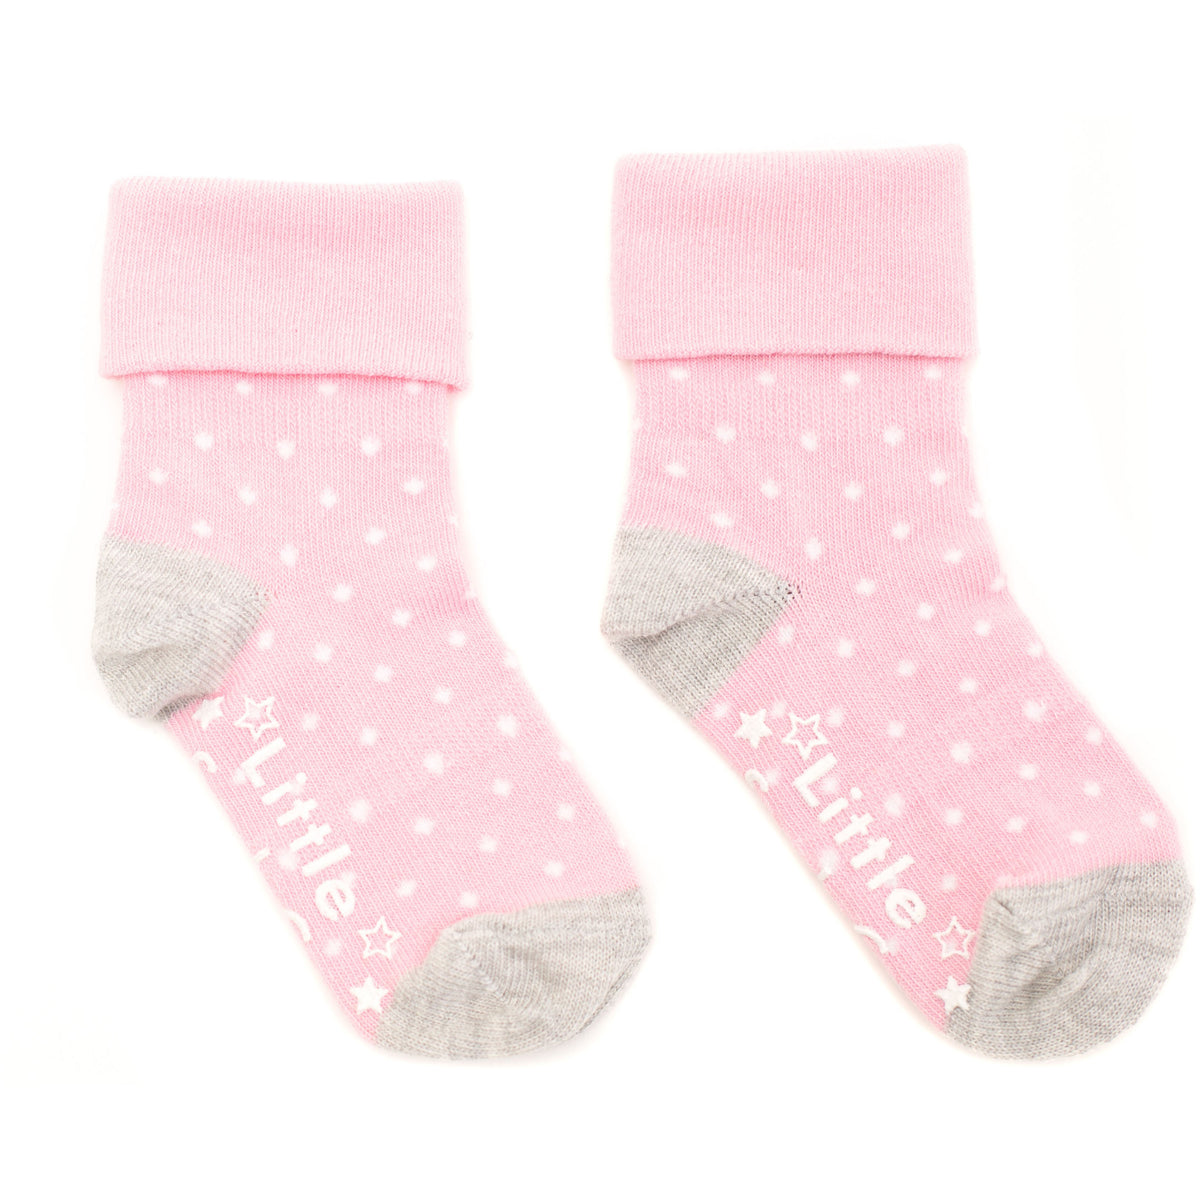 Non-Slip Stay on Baby and Toddler Socks - Candy Pink